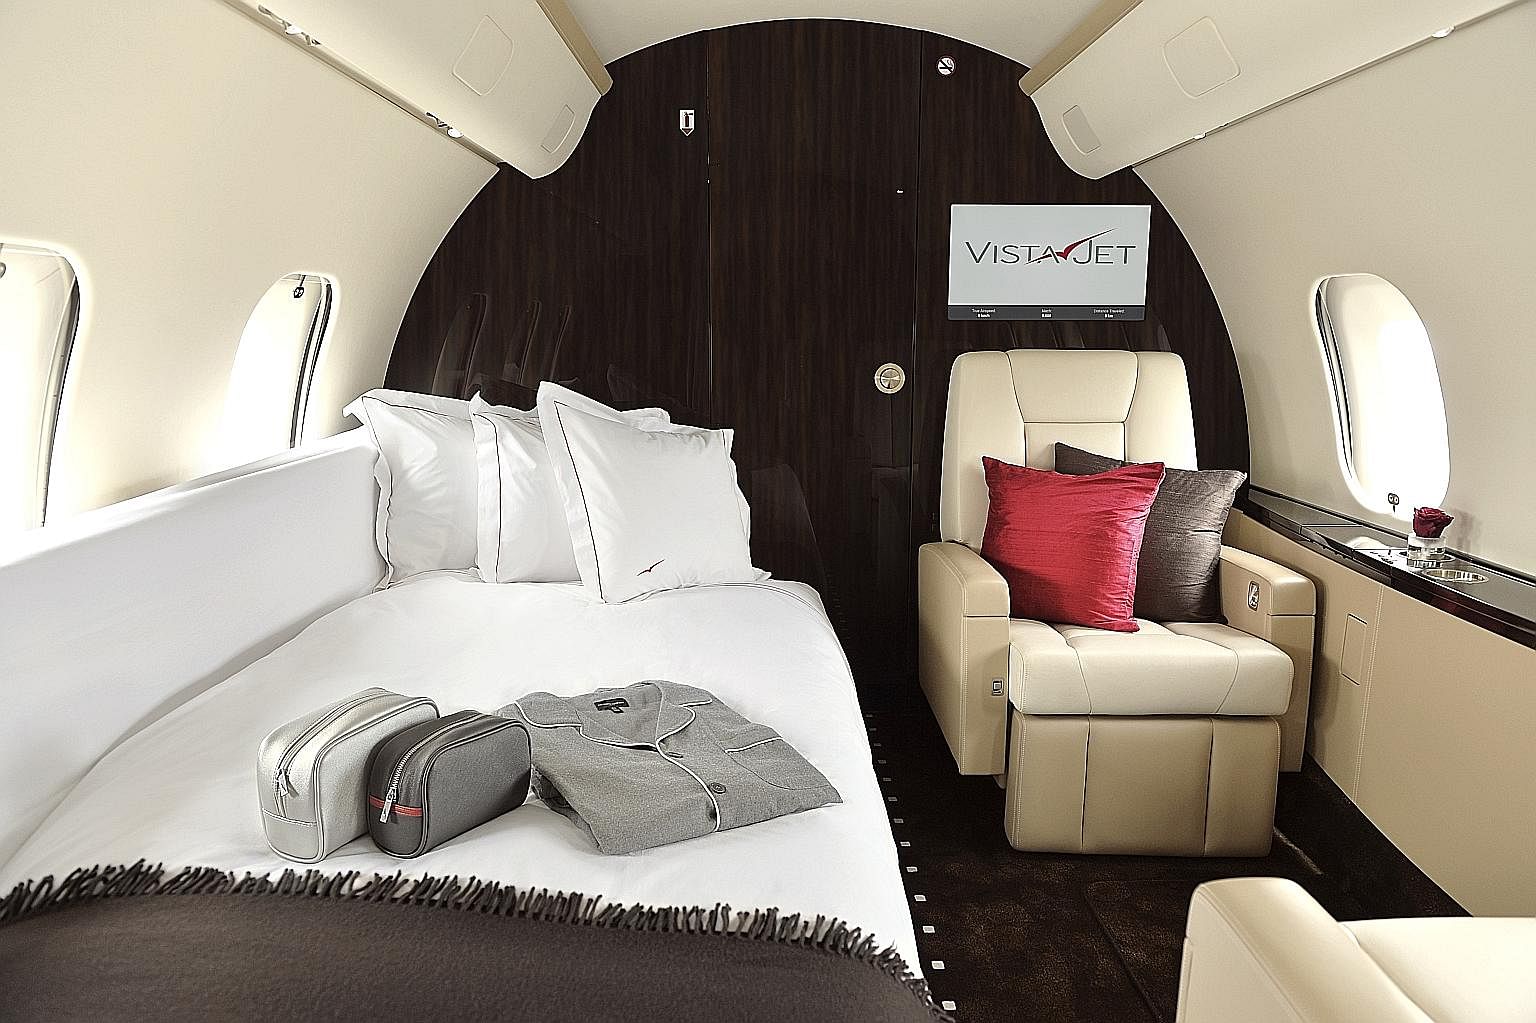 Have a nap or enjoy luxurious teatime treats aboard a VistaJet private plane. The Aman Private Jet has buttery leather seats and accommodates up to 12 passengers.